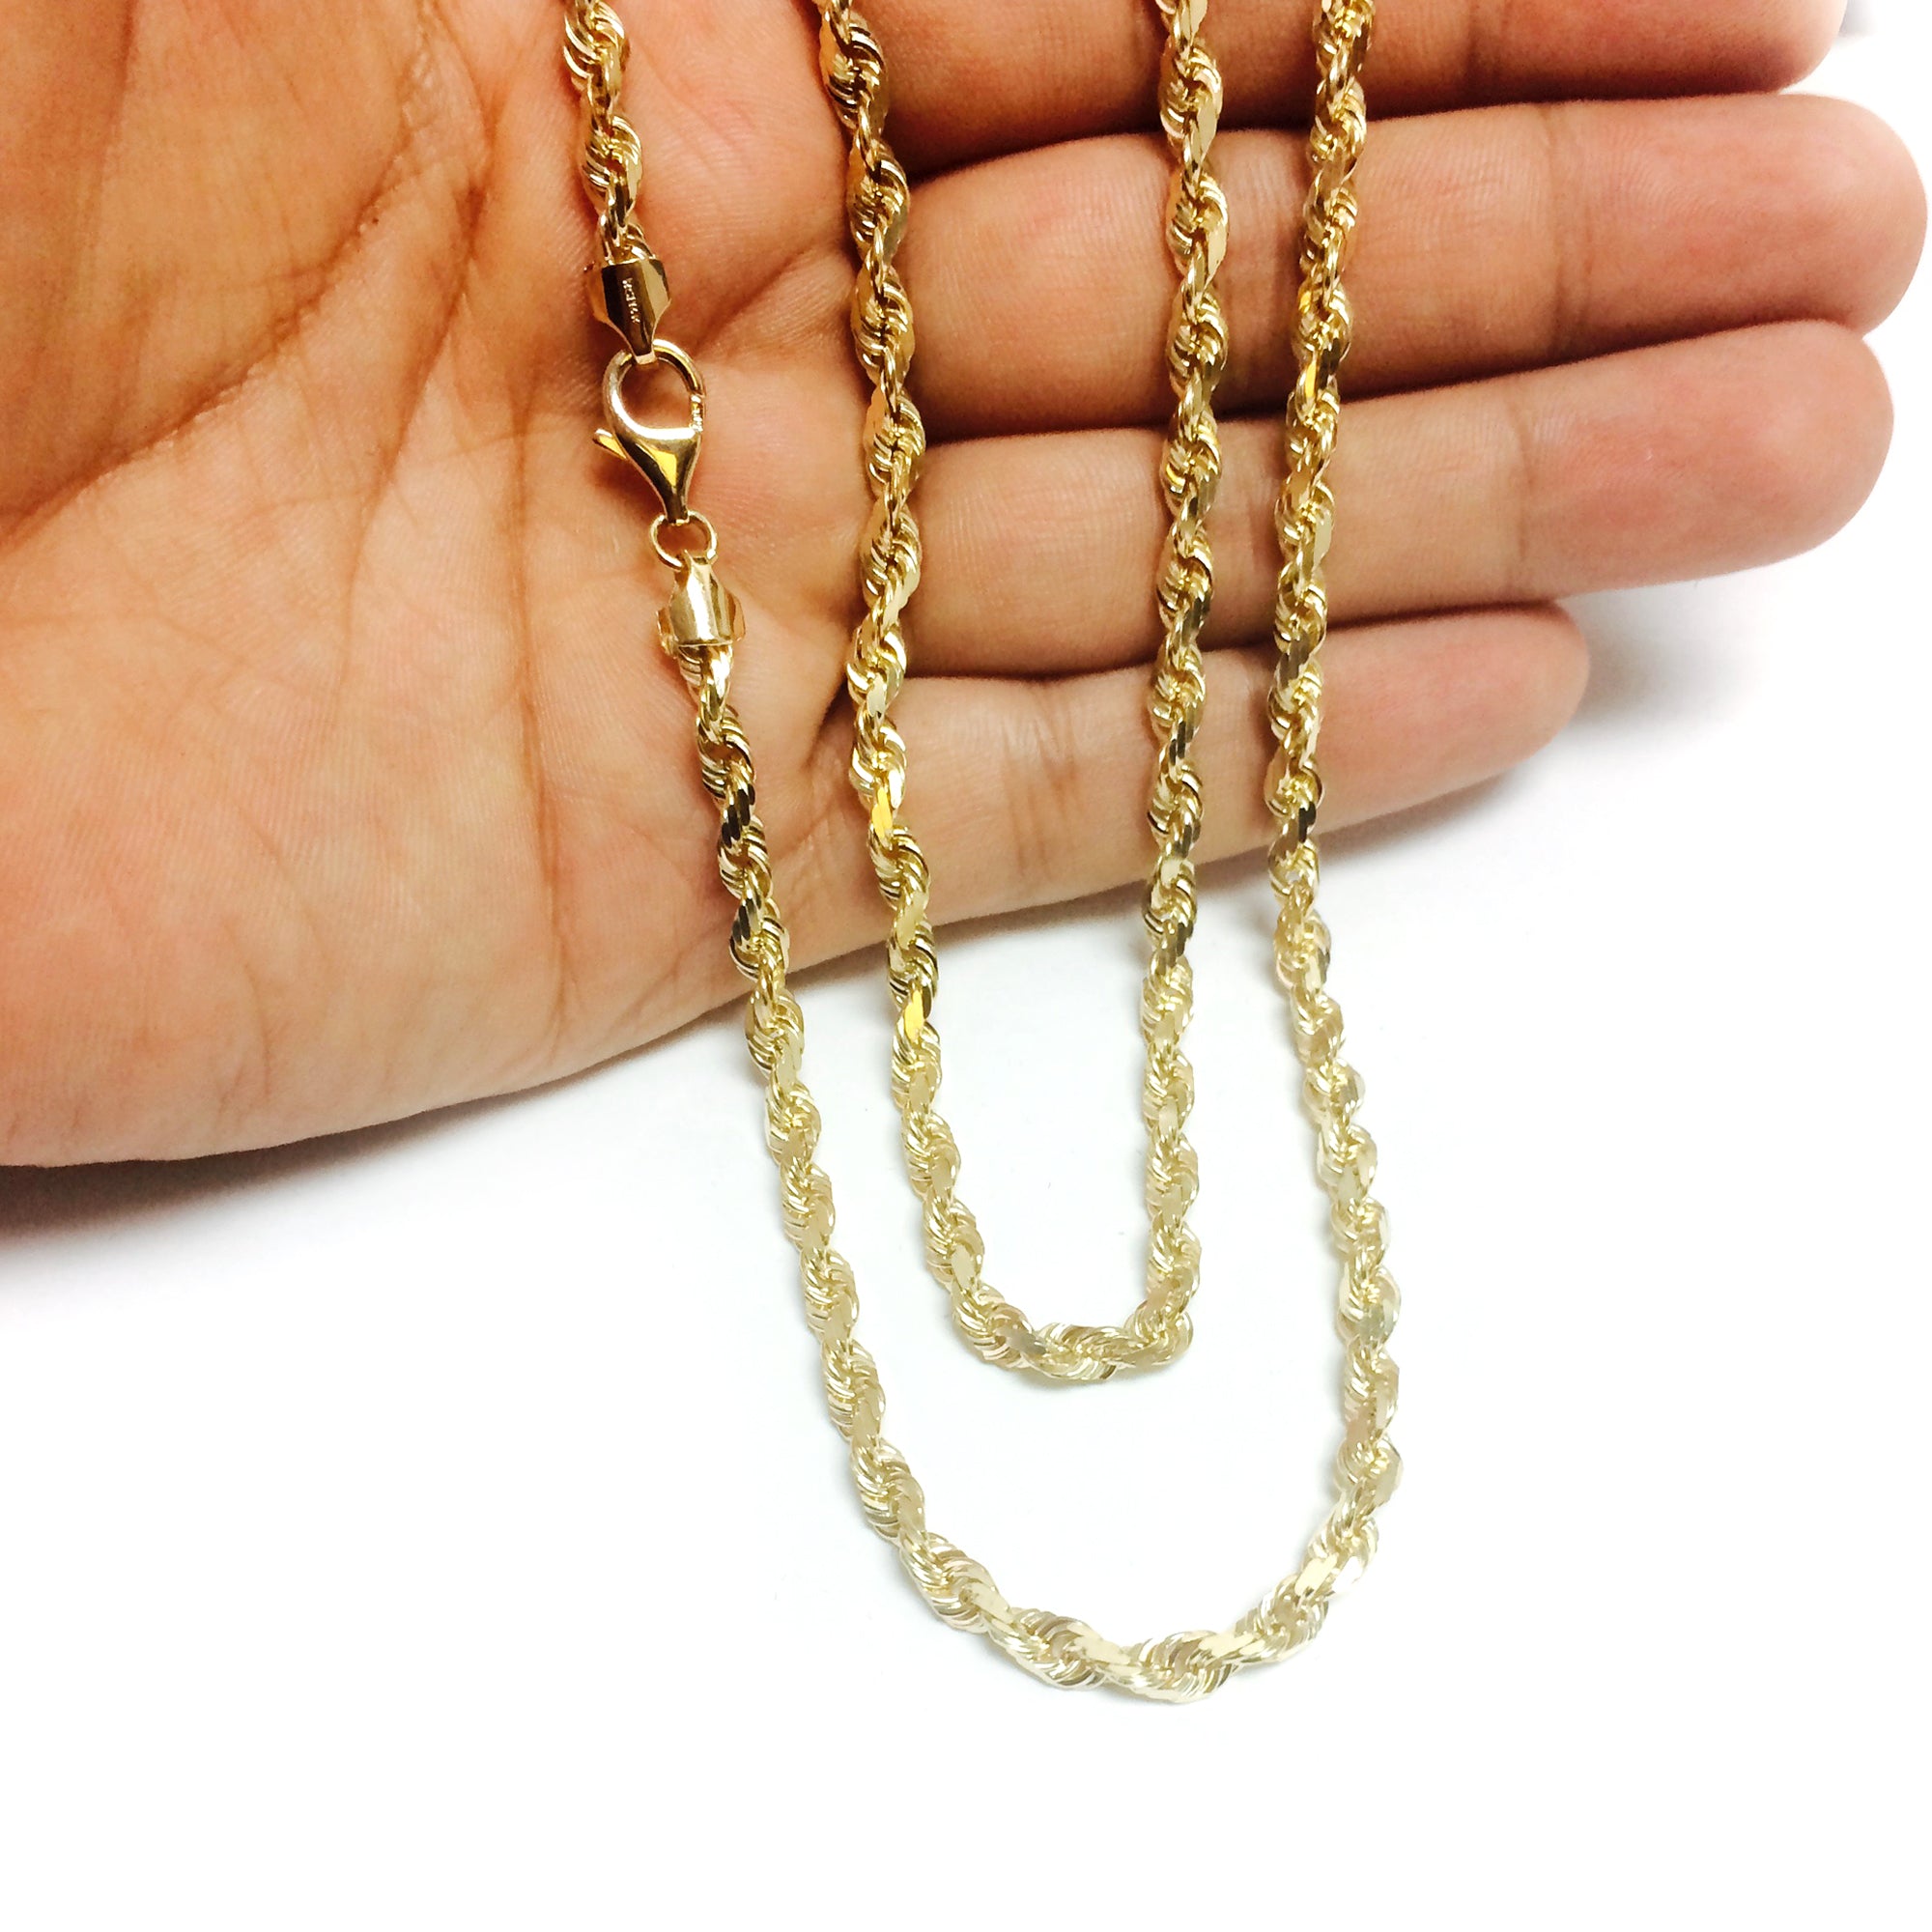 14k Yellow Solid Gold Diamond Cut Rope Chain Necklace, 5.0mm fine designer jewelry for men and women